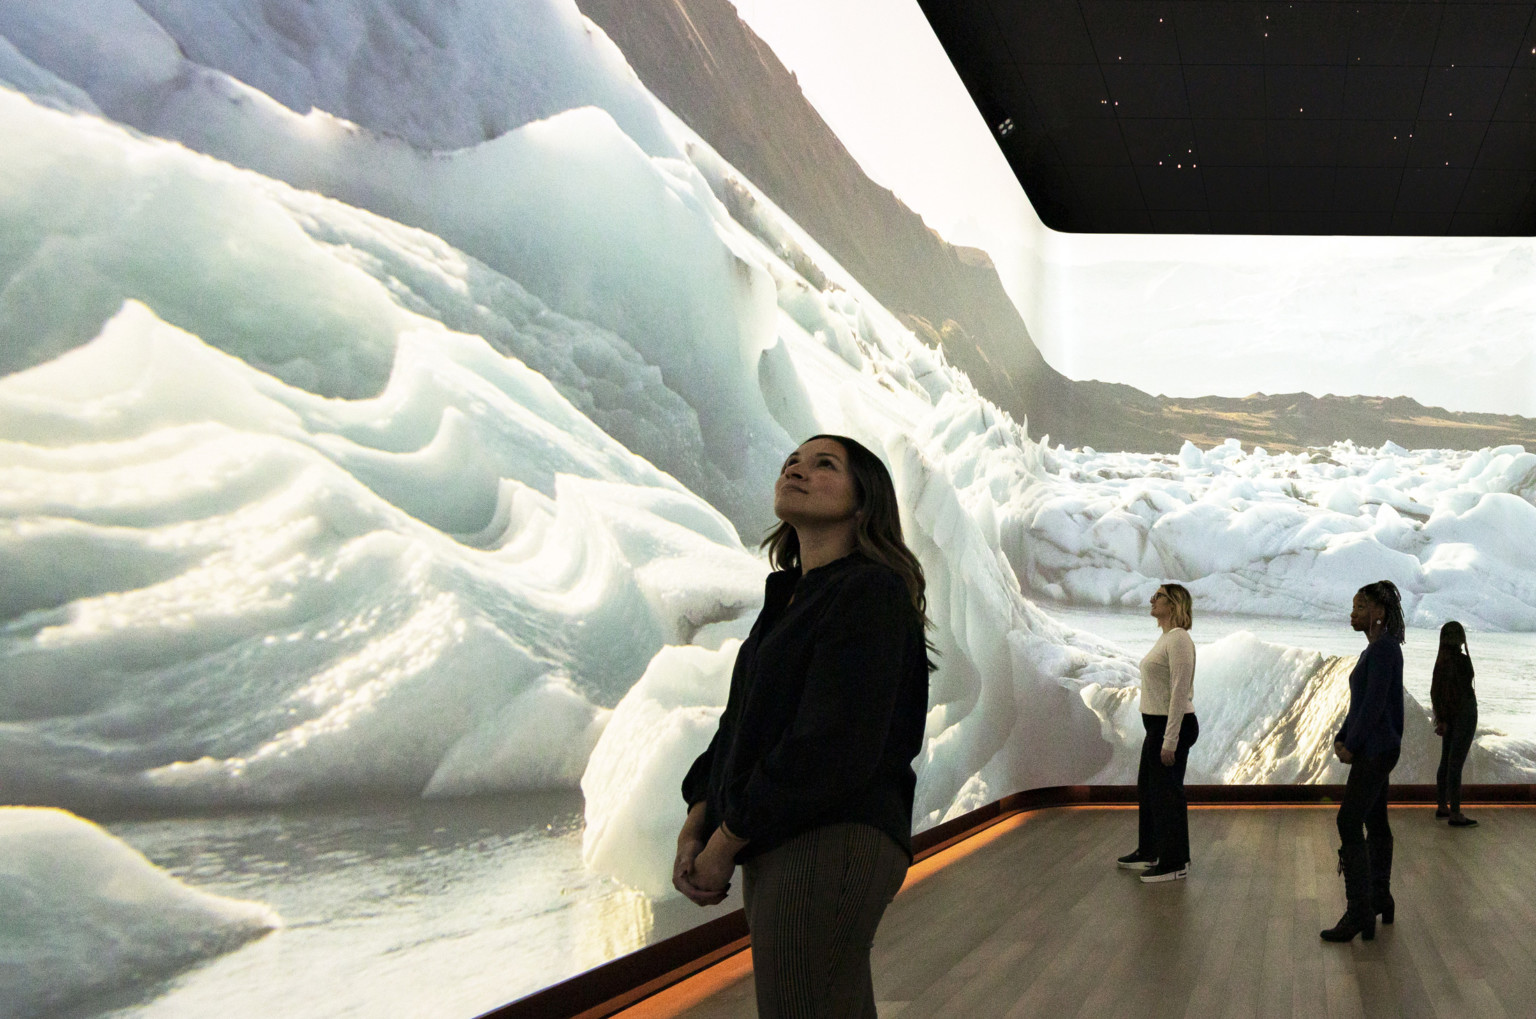 Woman stands in front of immersive 360 degree video art display of snow dunes and ice